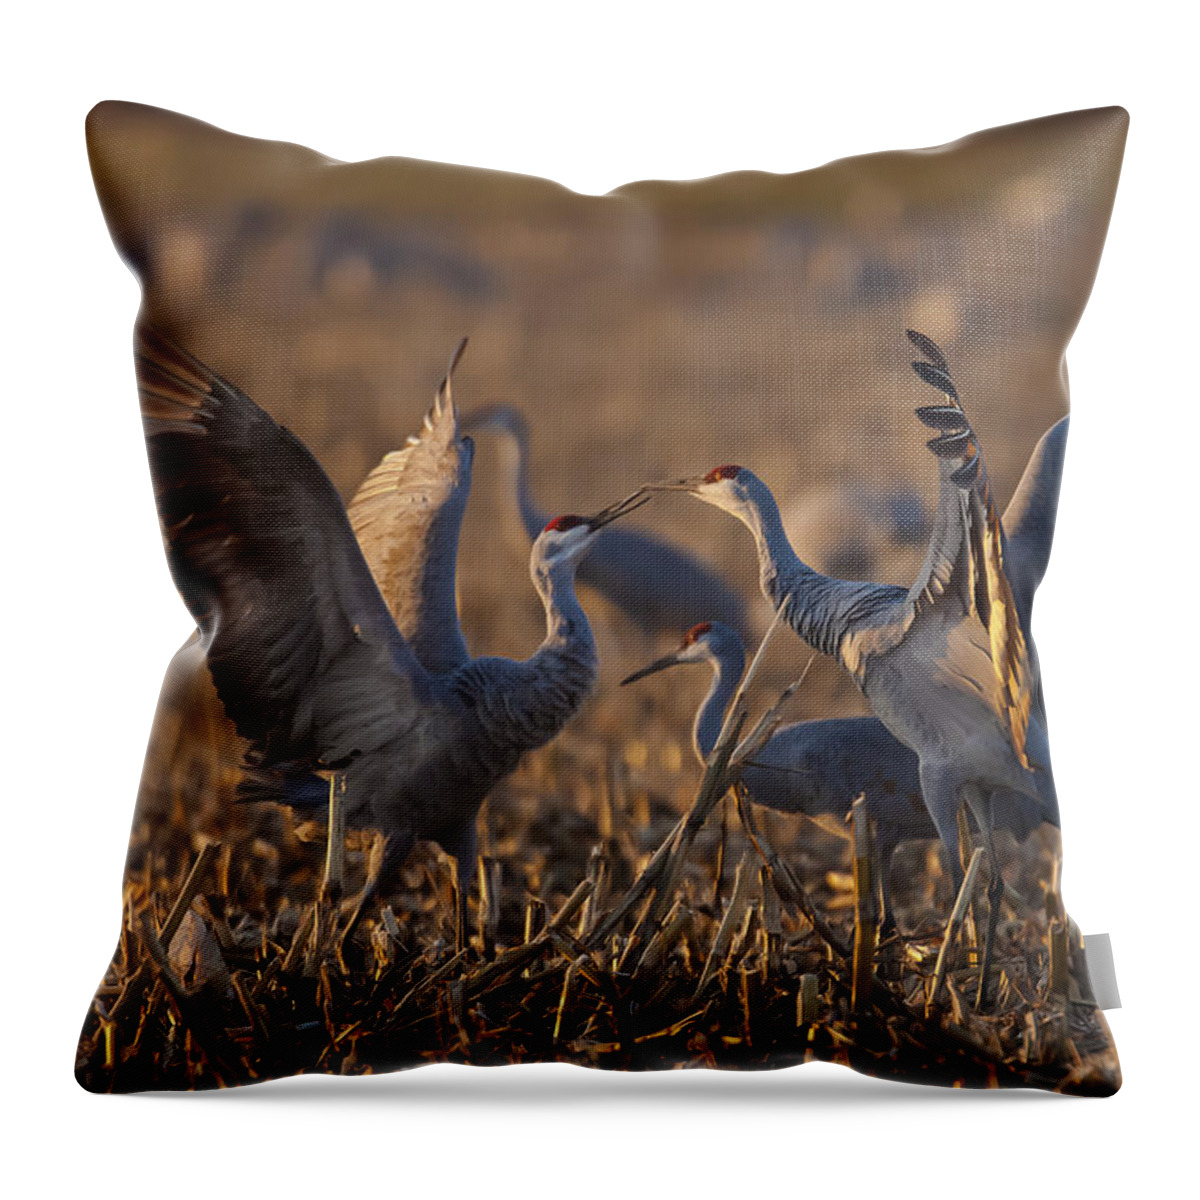 Animals Throw Pillow featuring the photograph Kissing Sandhills by Jack R Perry